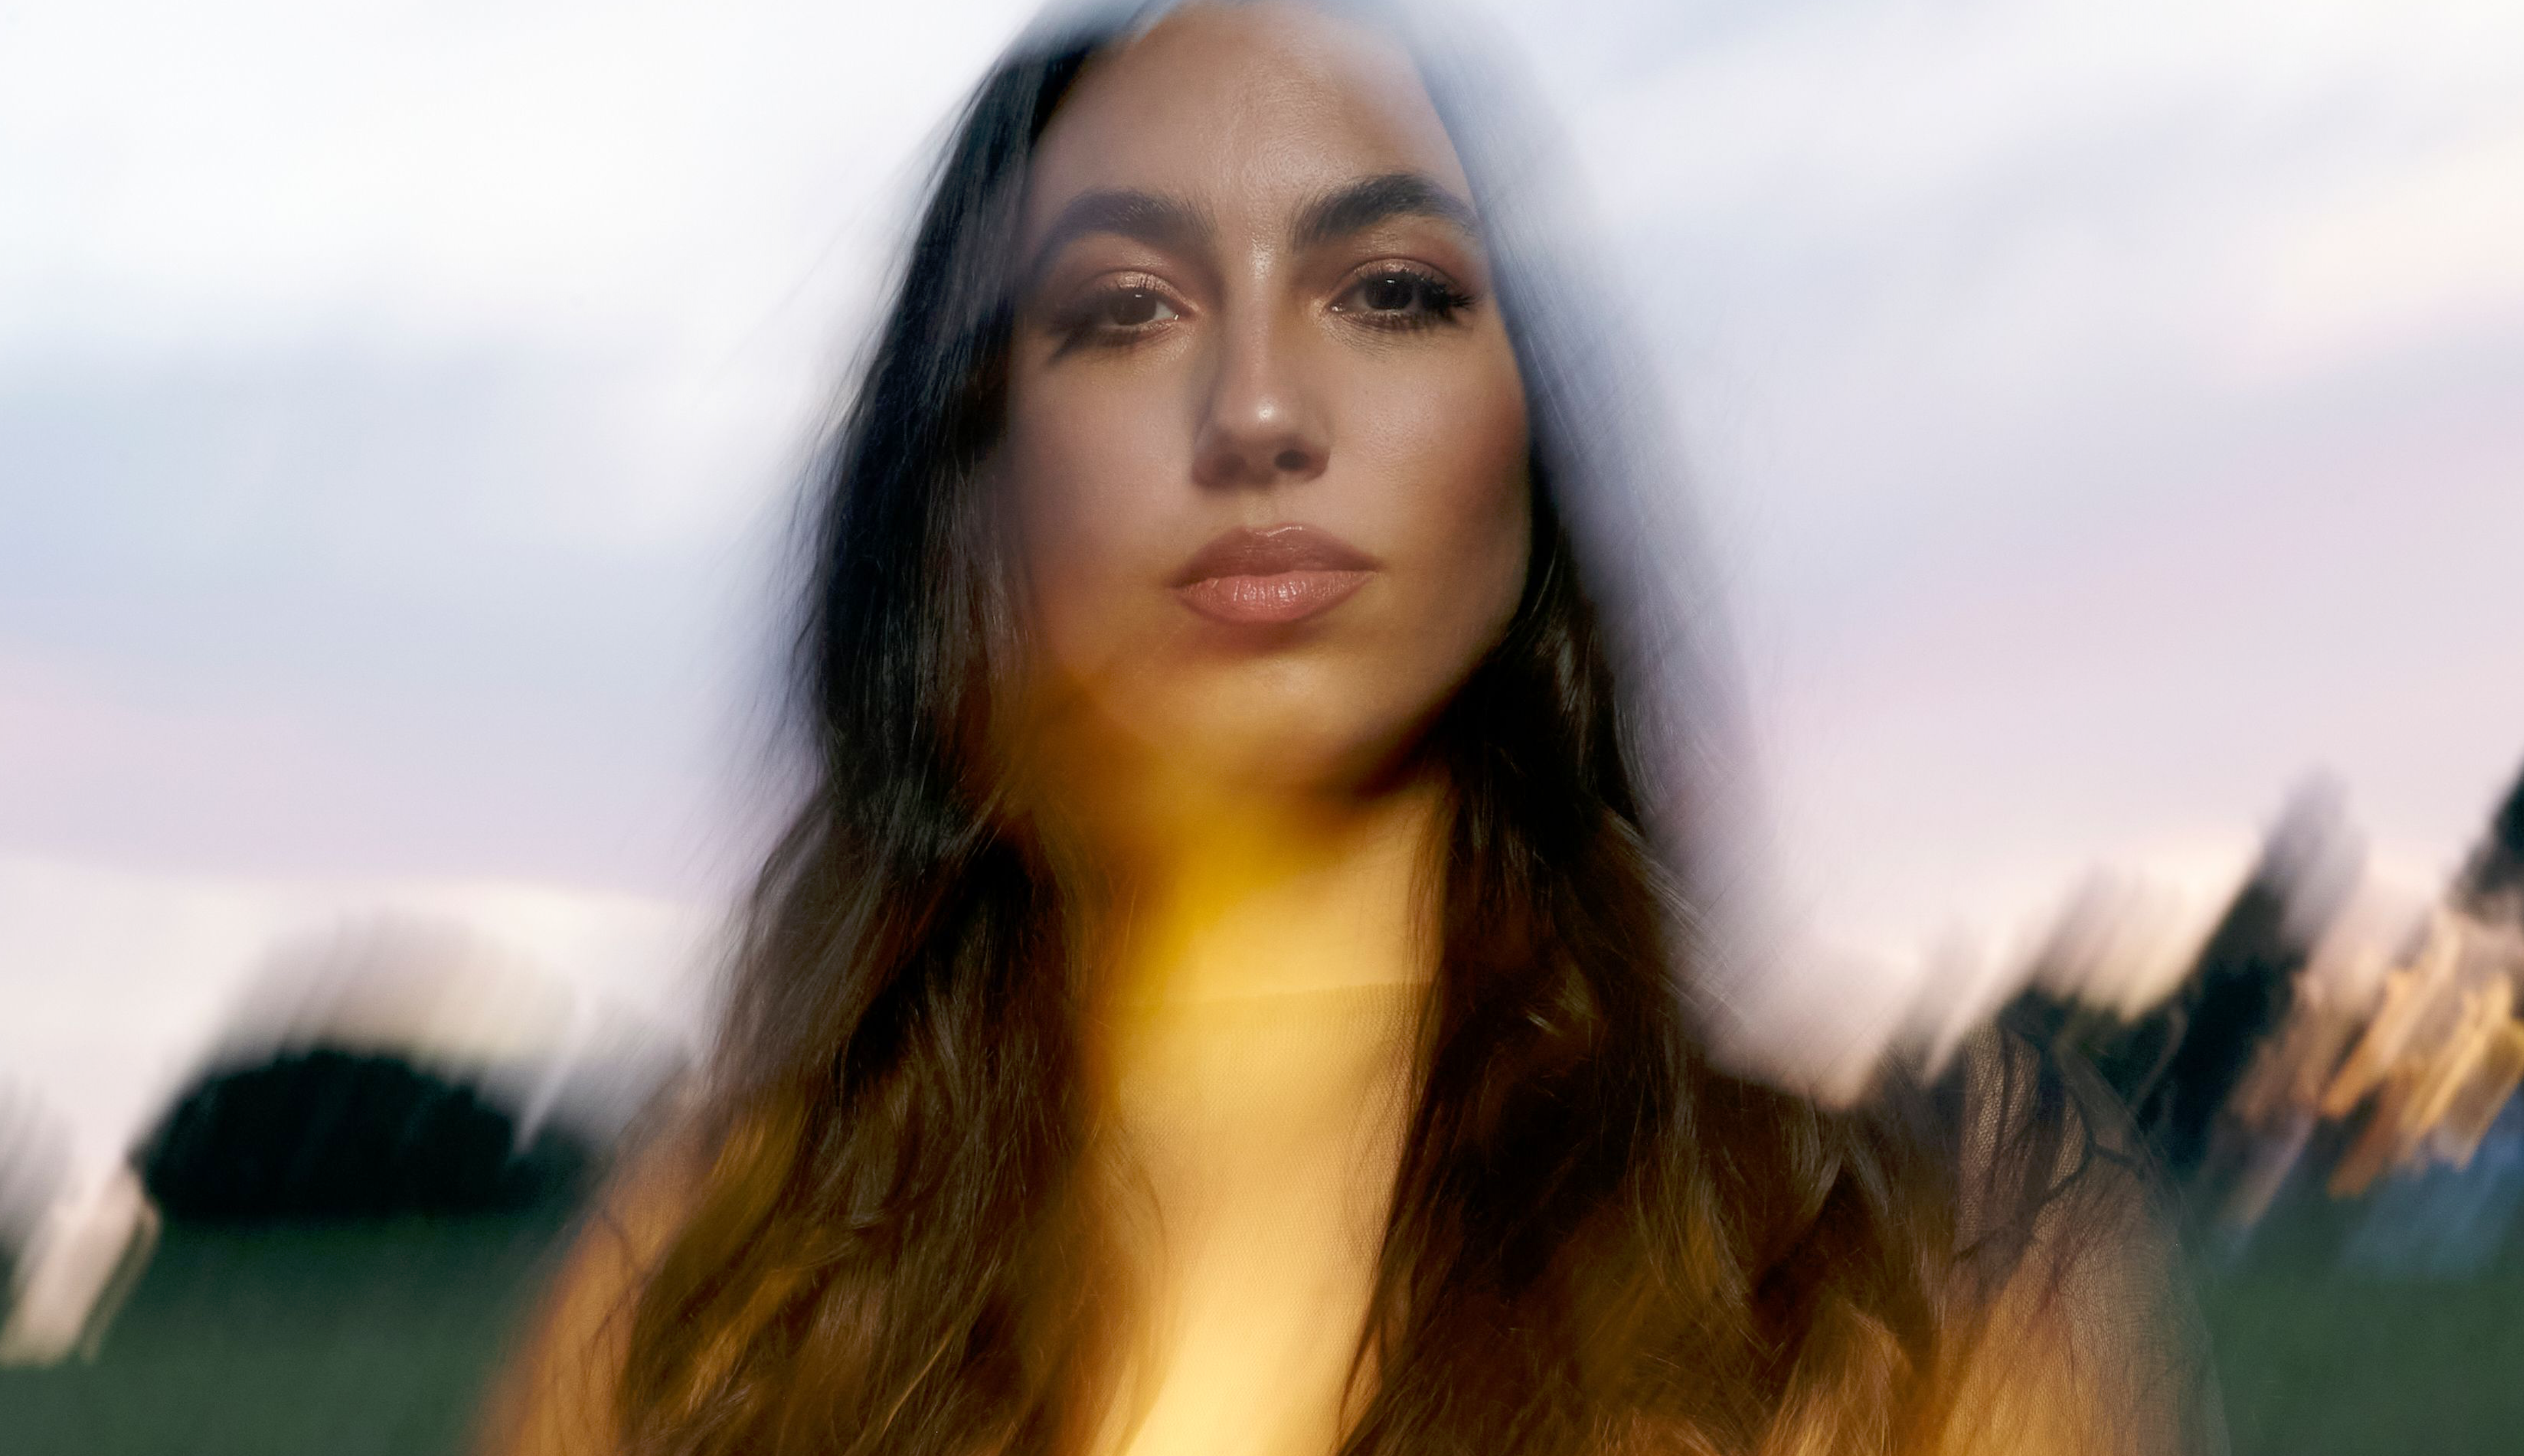 A portrait of María José Llergo with a serene expression, captured with a motion blur effect that gives the image a dreamlike, ethereal quality.